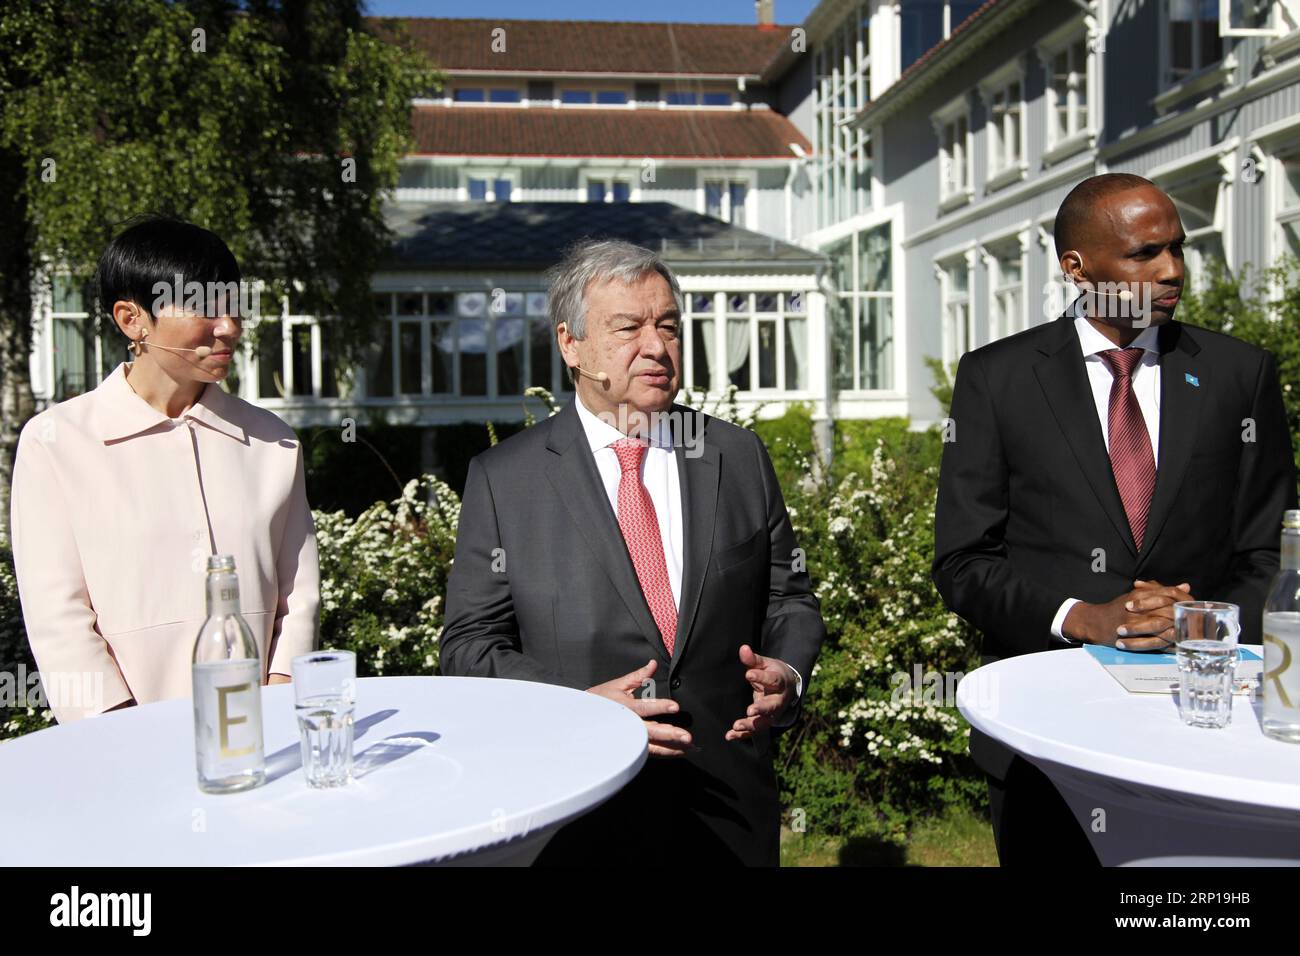 (180619) -- OSLO, June 19, 2018 -- UN Secretary-General Antonio Guterres (C), Norwegian Minister of Foreign Affairs Ine Eriksen Soreide (L), and Somalian Prime Minister Hassan Ali Khaire, attend a joint press conference in Oslo, capital of Norway, on June 19, 2018. UN Secretary-General Antonio Guterres said on Tuesday that more mediation is needed as the world is dangerous and the situation is deteriorating. ) NORWAY-OSLO-OSLO FORUM-UN-CHIEF-PRESS CONFERENCE LiangxYouchang PUBLICATIONxNOTxINxCHN Stock Photo